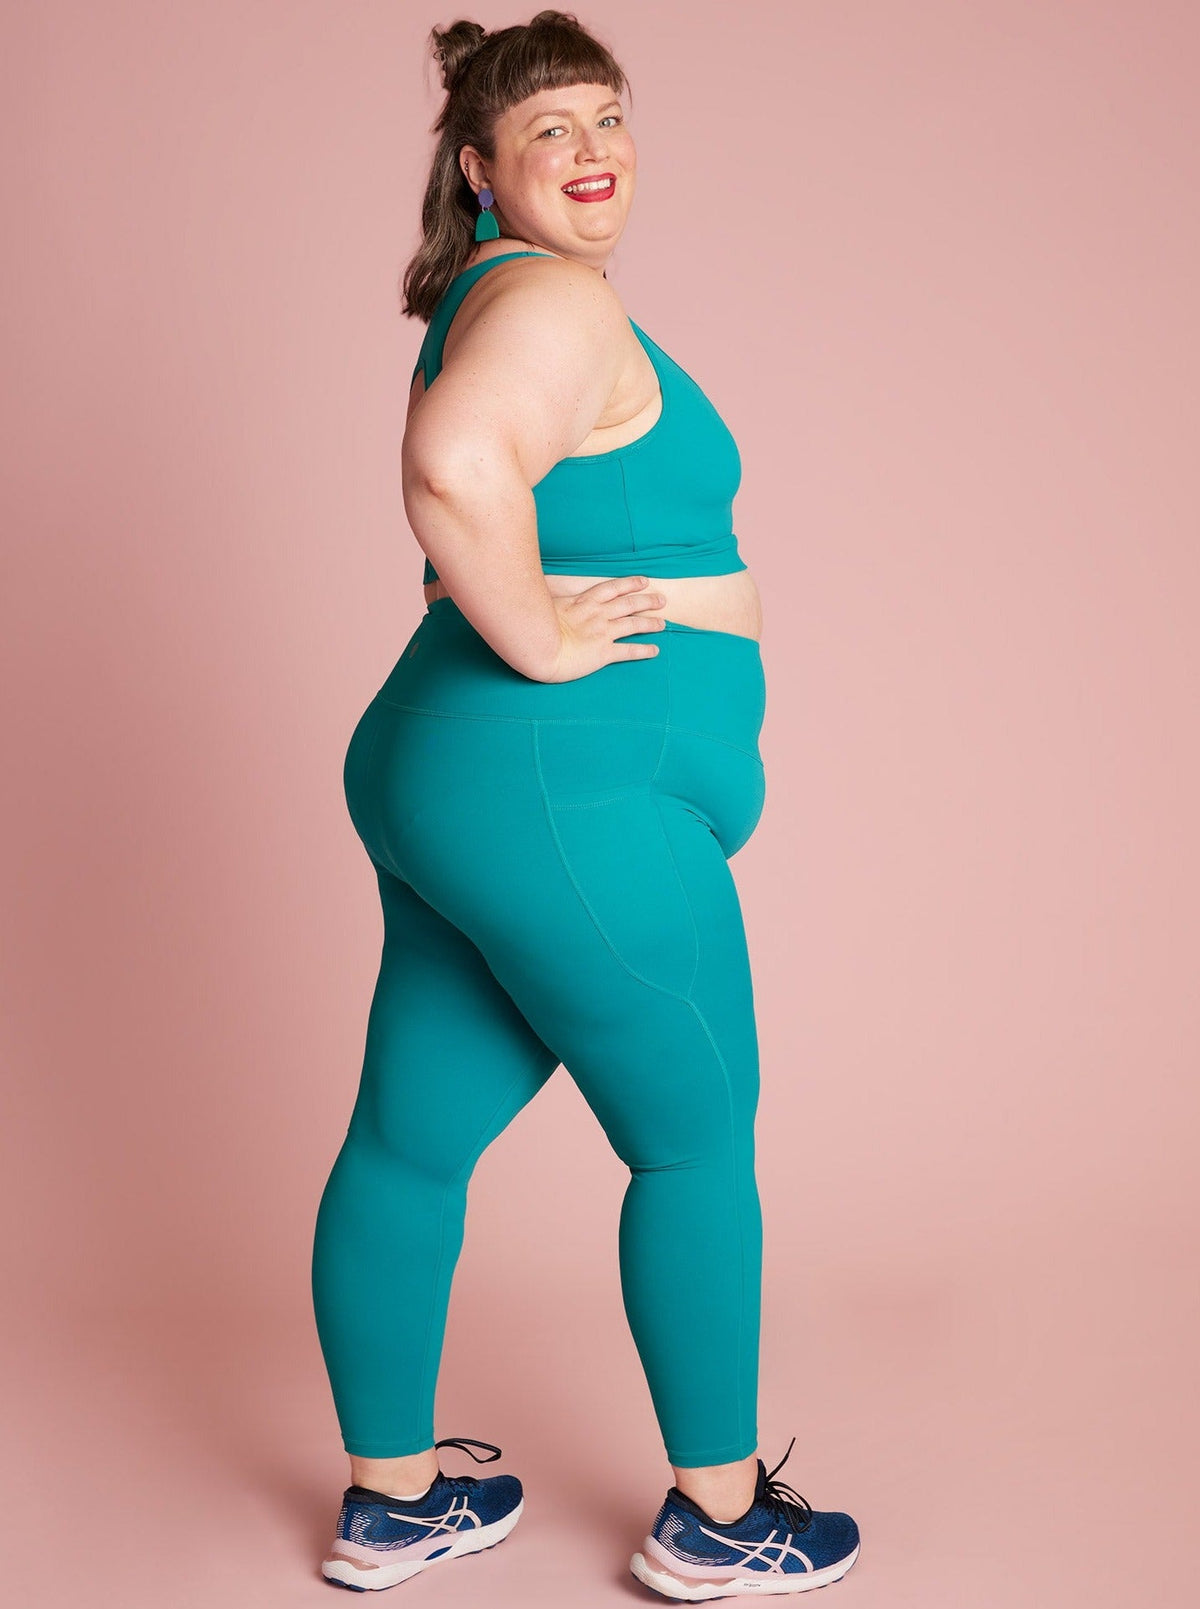 Forest Green Everyday Legging - 7/8 length - high waisted leggings with tummy control